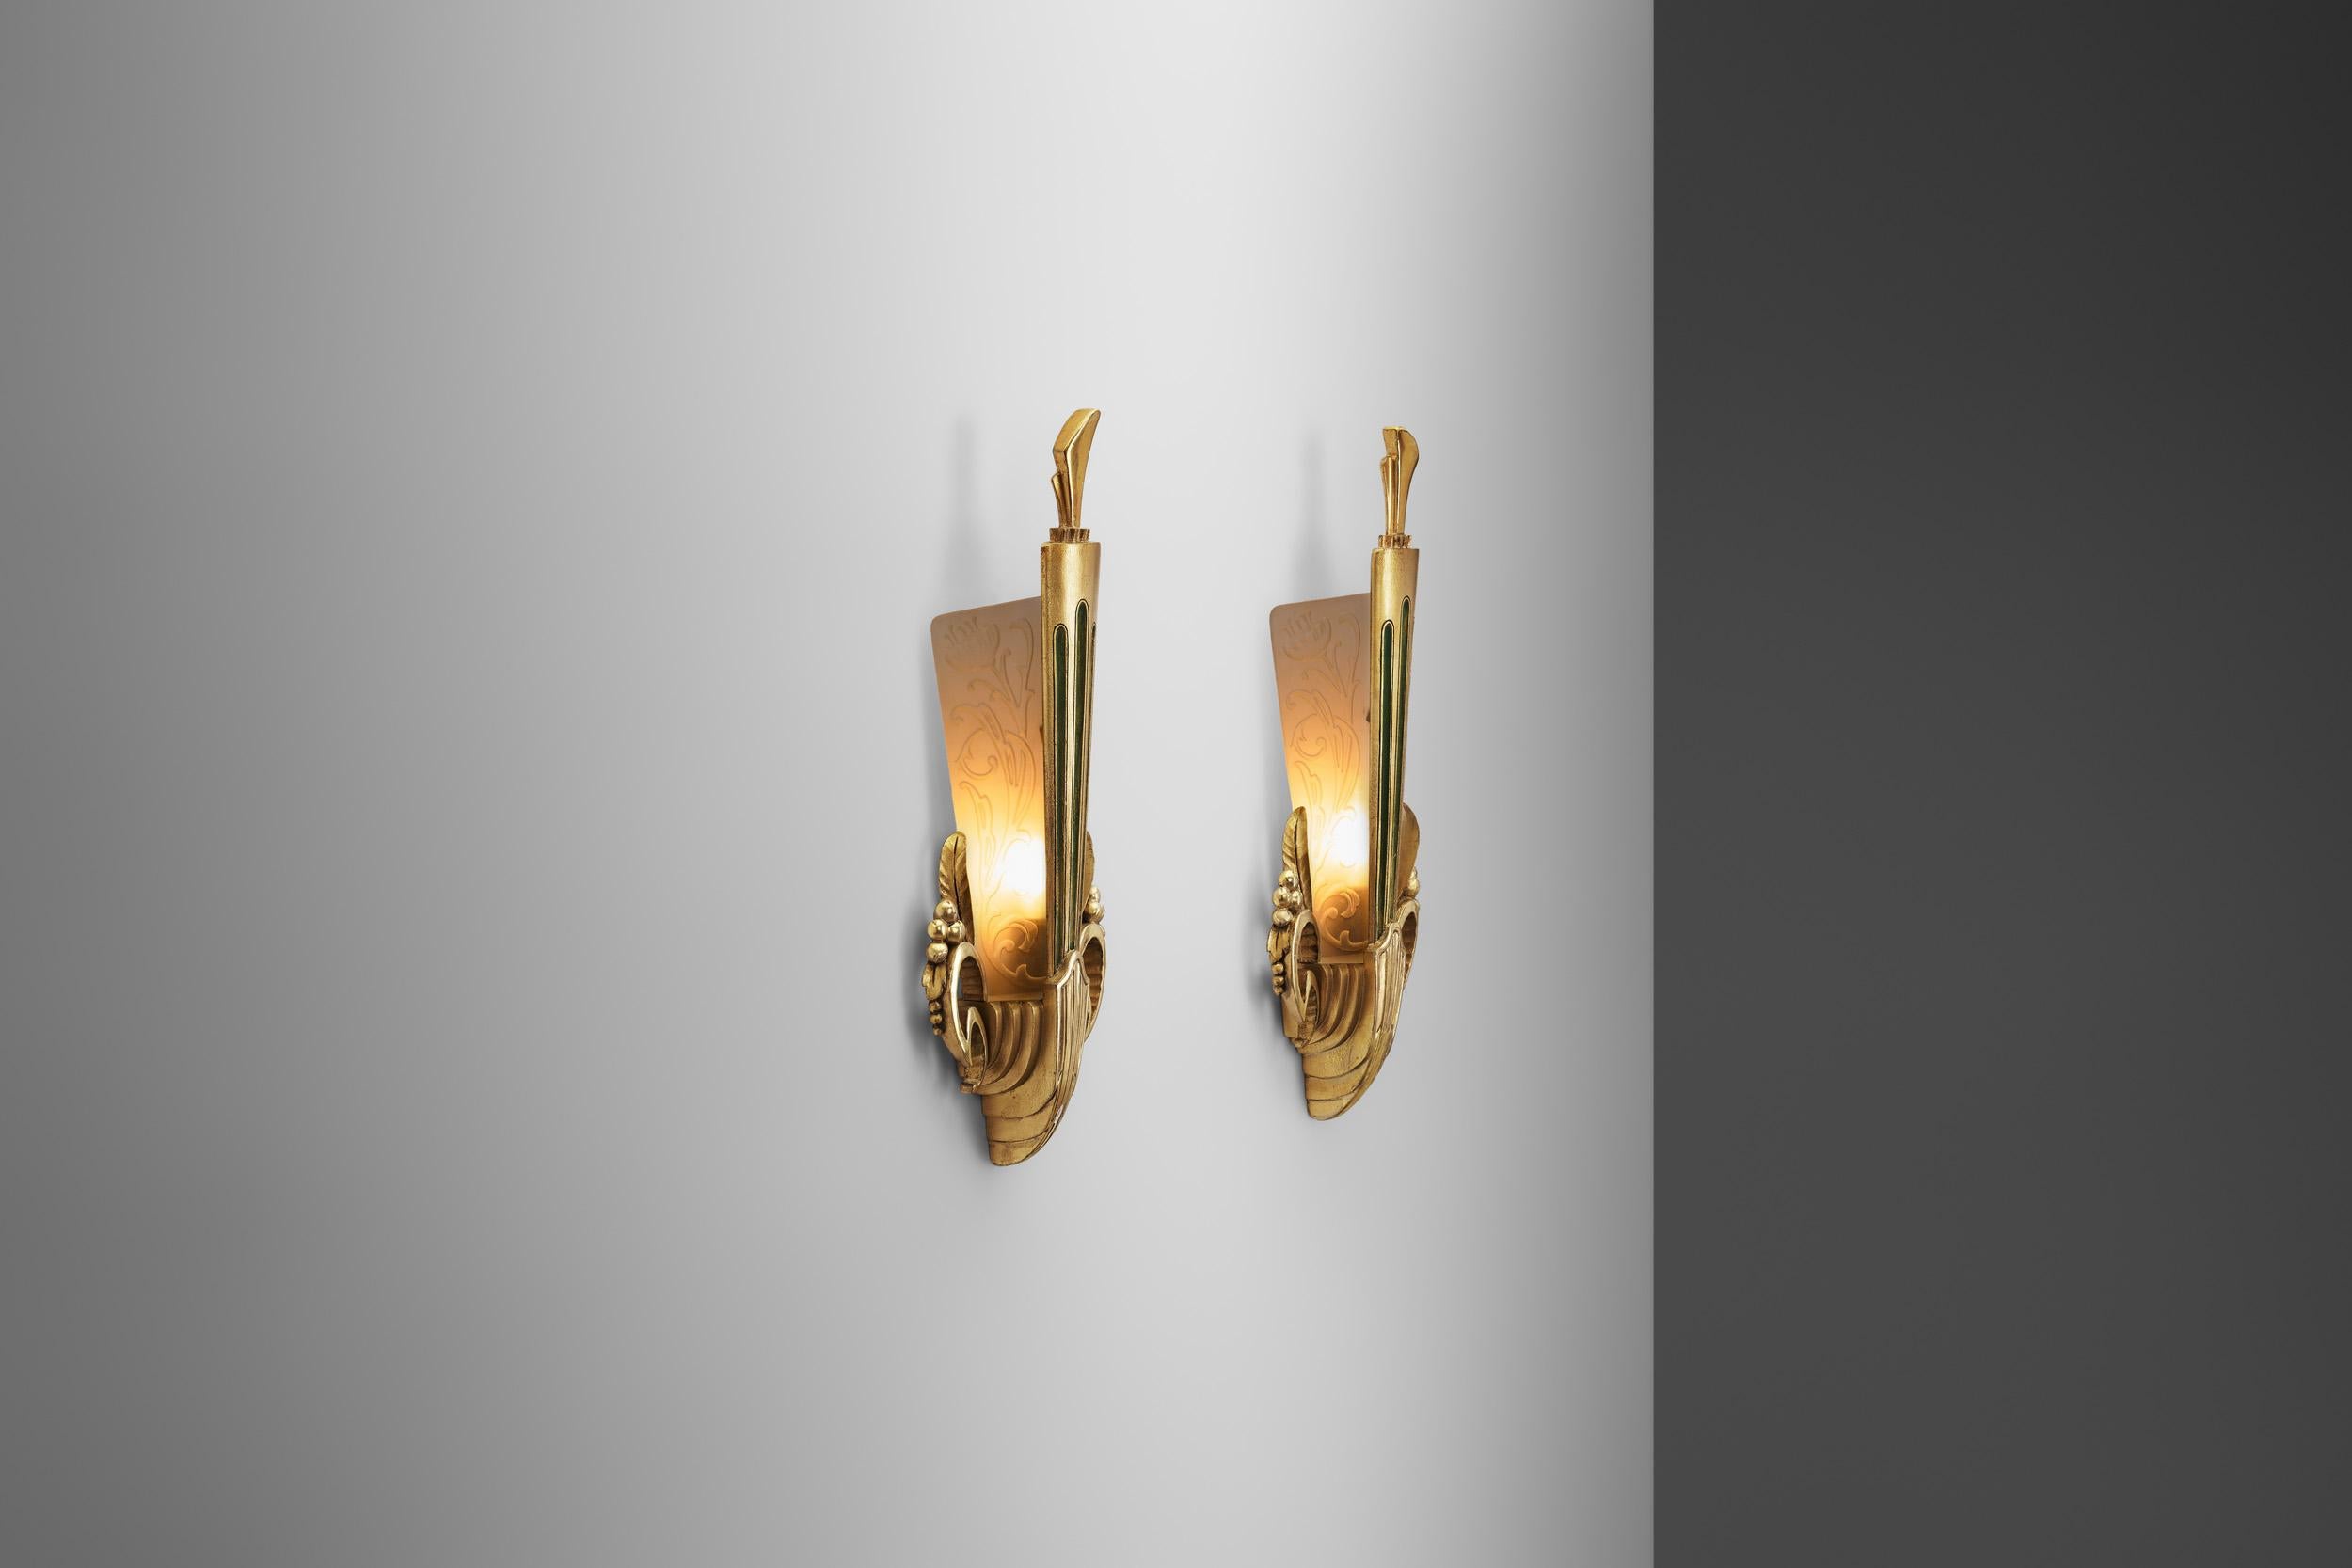 European Glass and Giltwood Wall Lights by Broman, Europe Early 20th Century For Sale